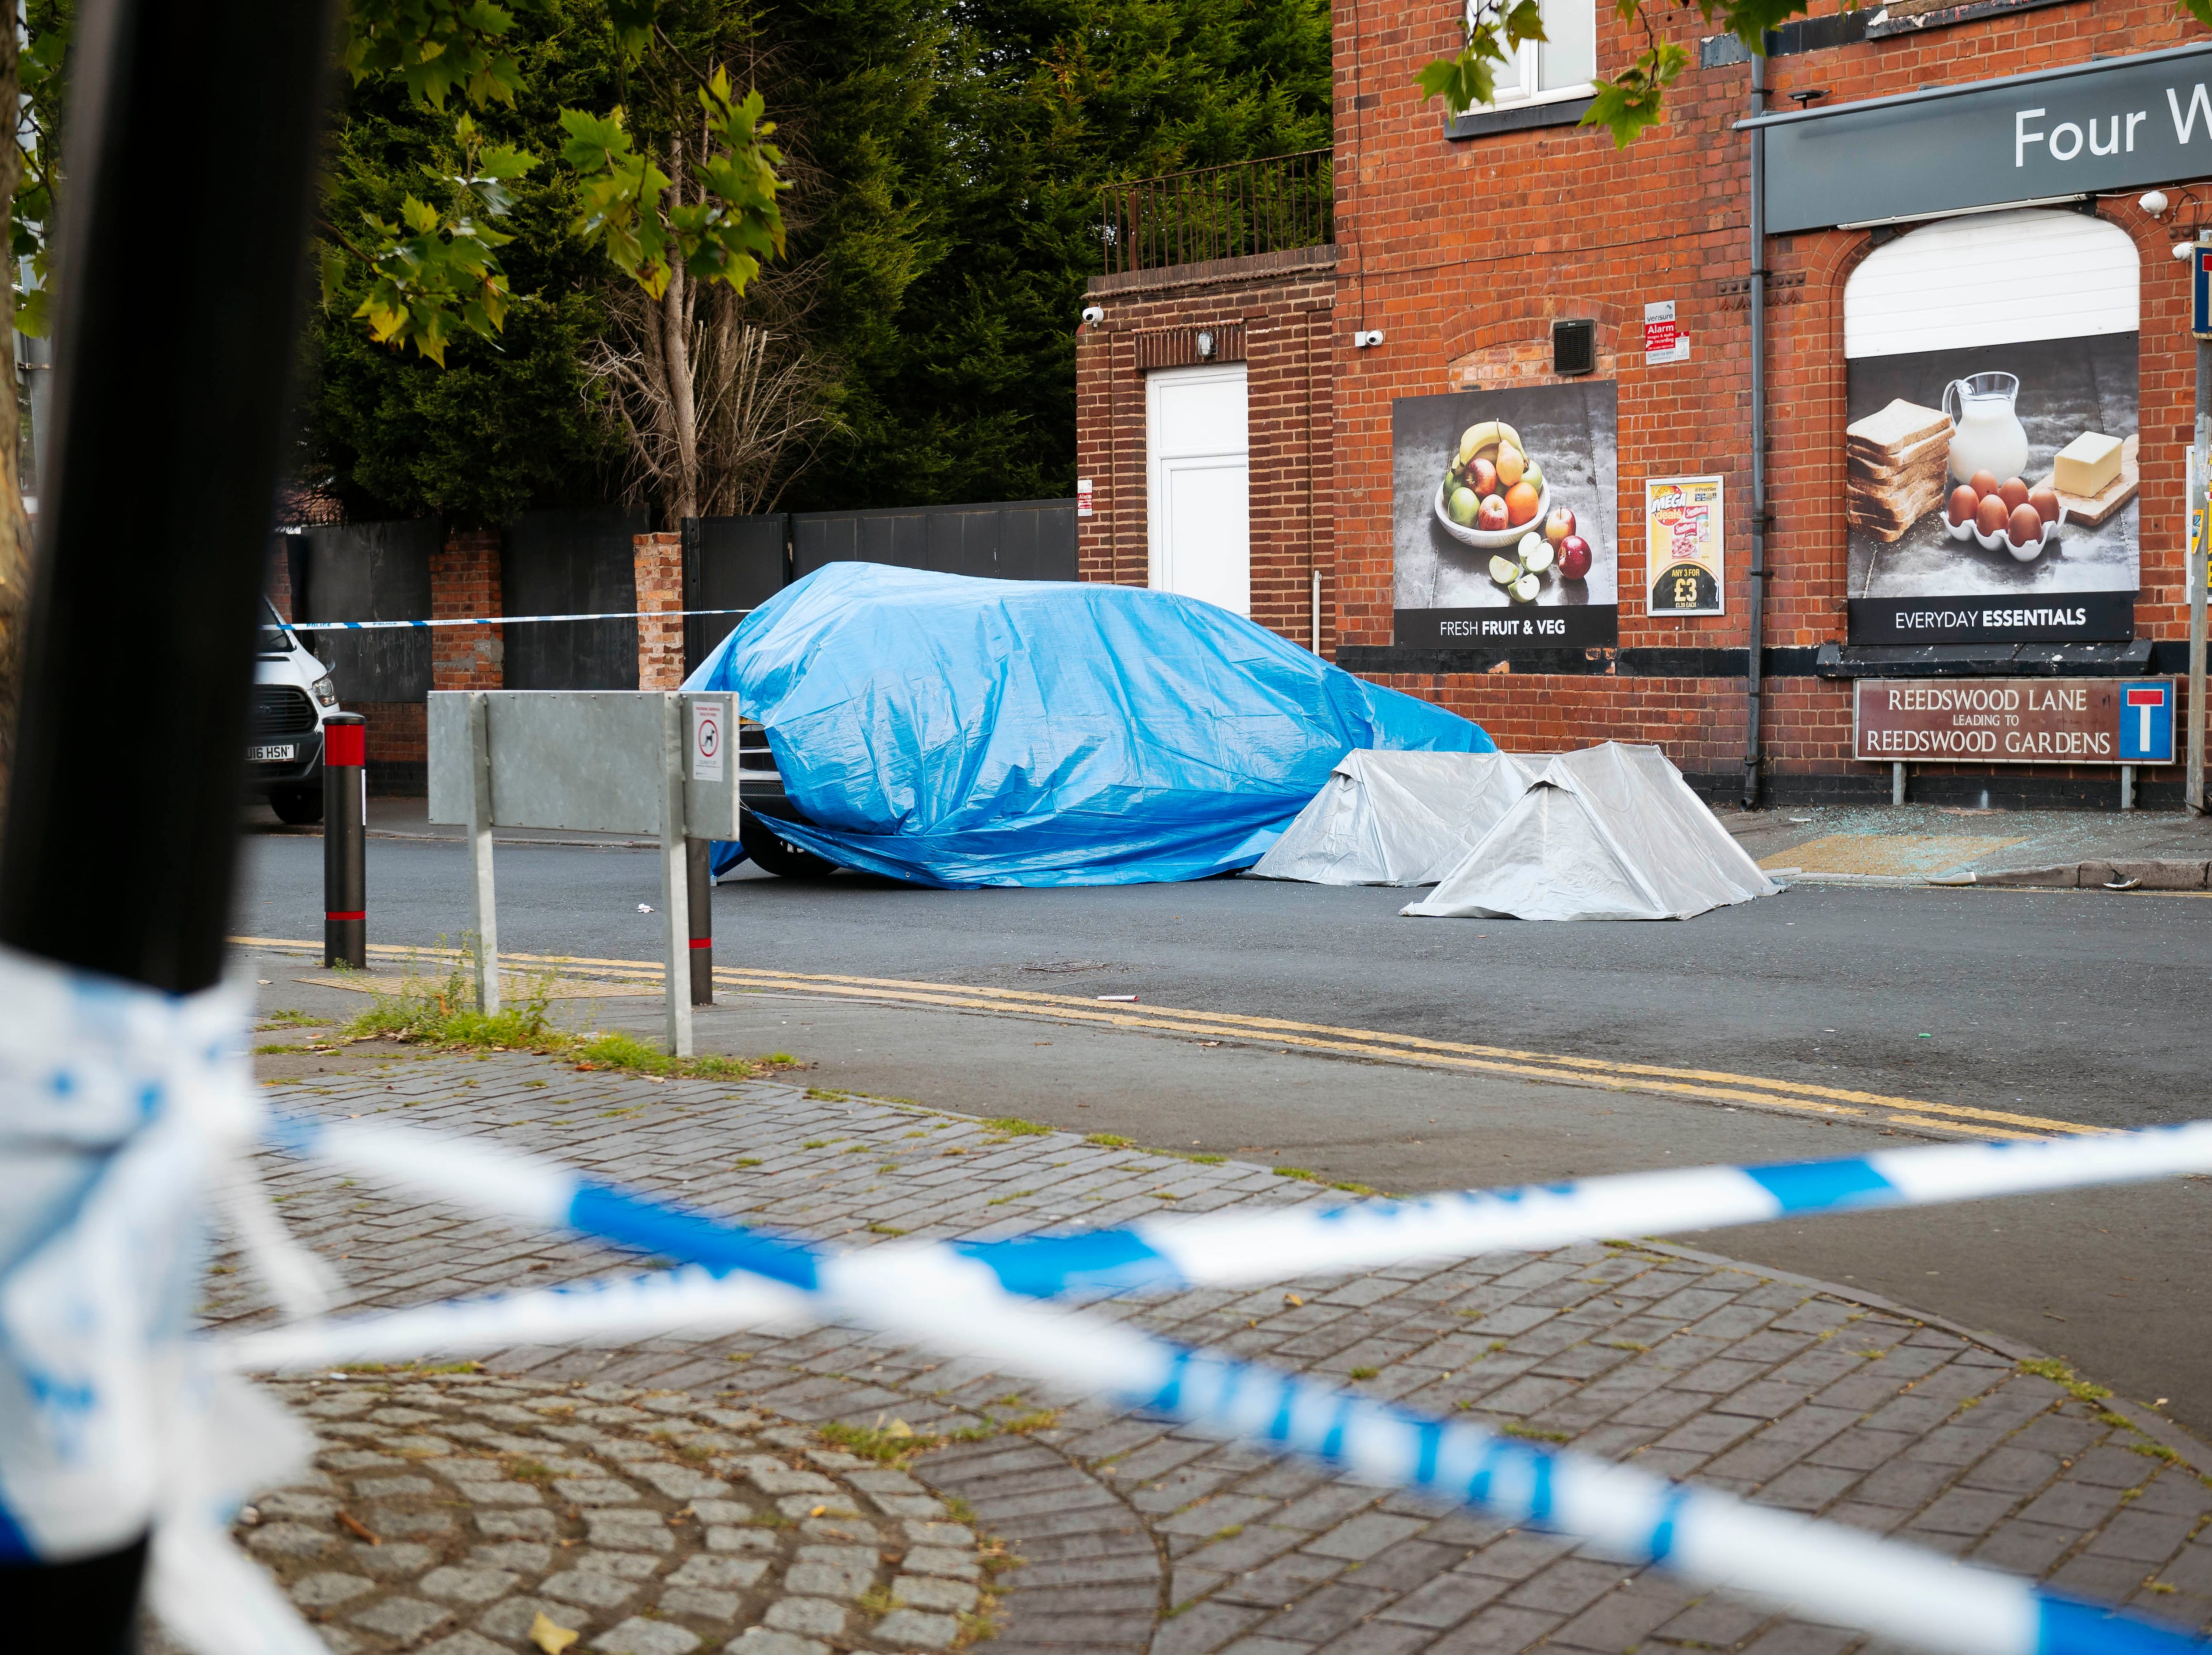 Police issue update on Walsall shooting as four men recover from injuries